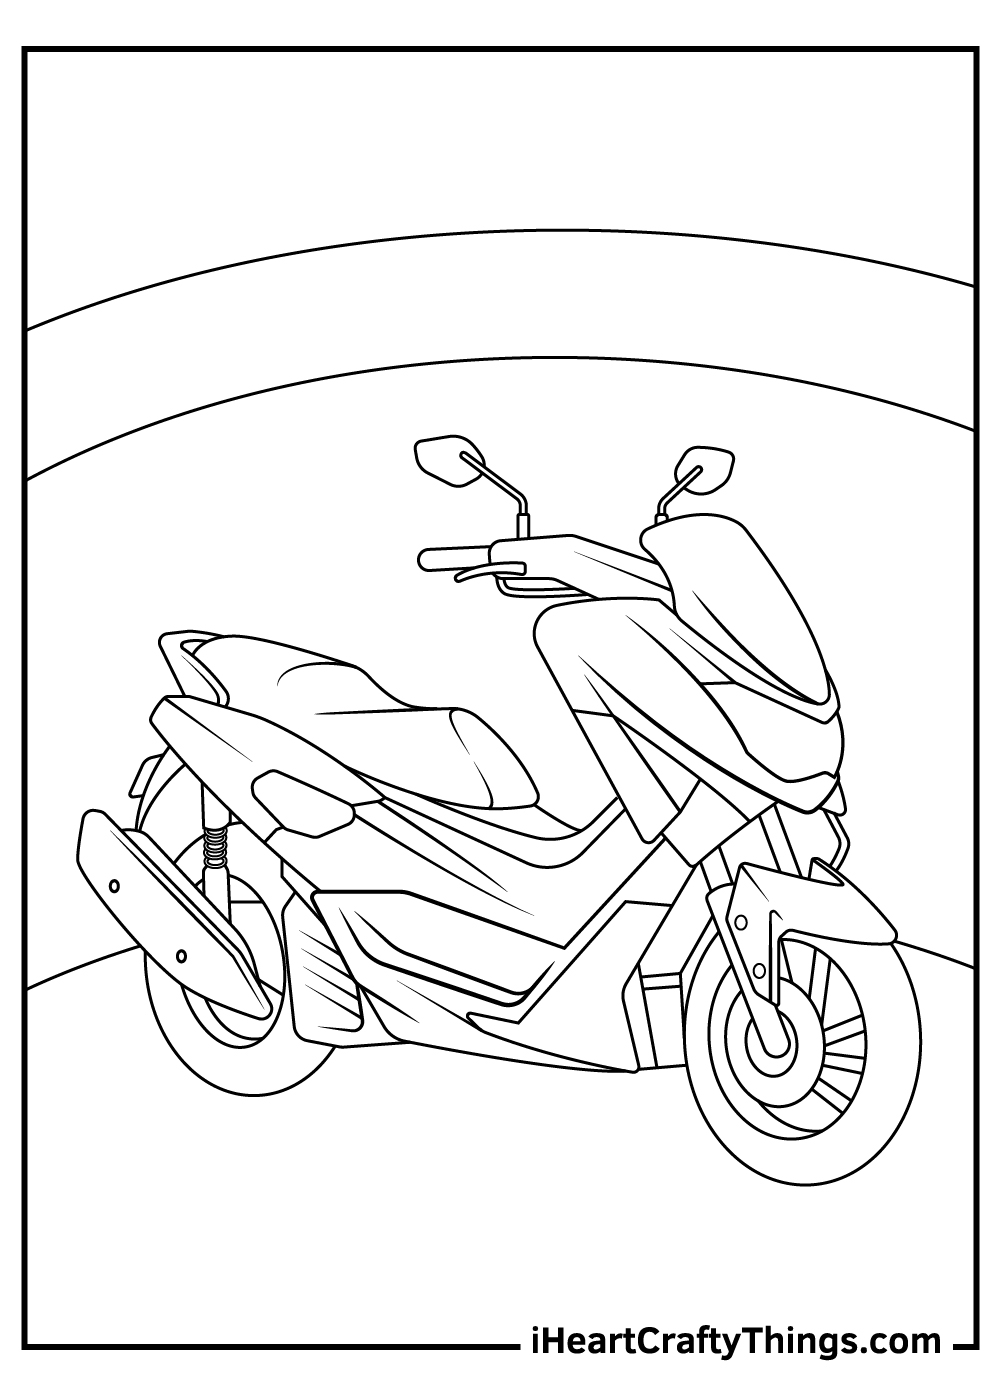 honda motorcycle coloring pages